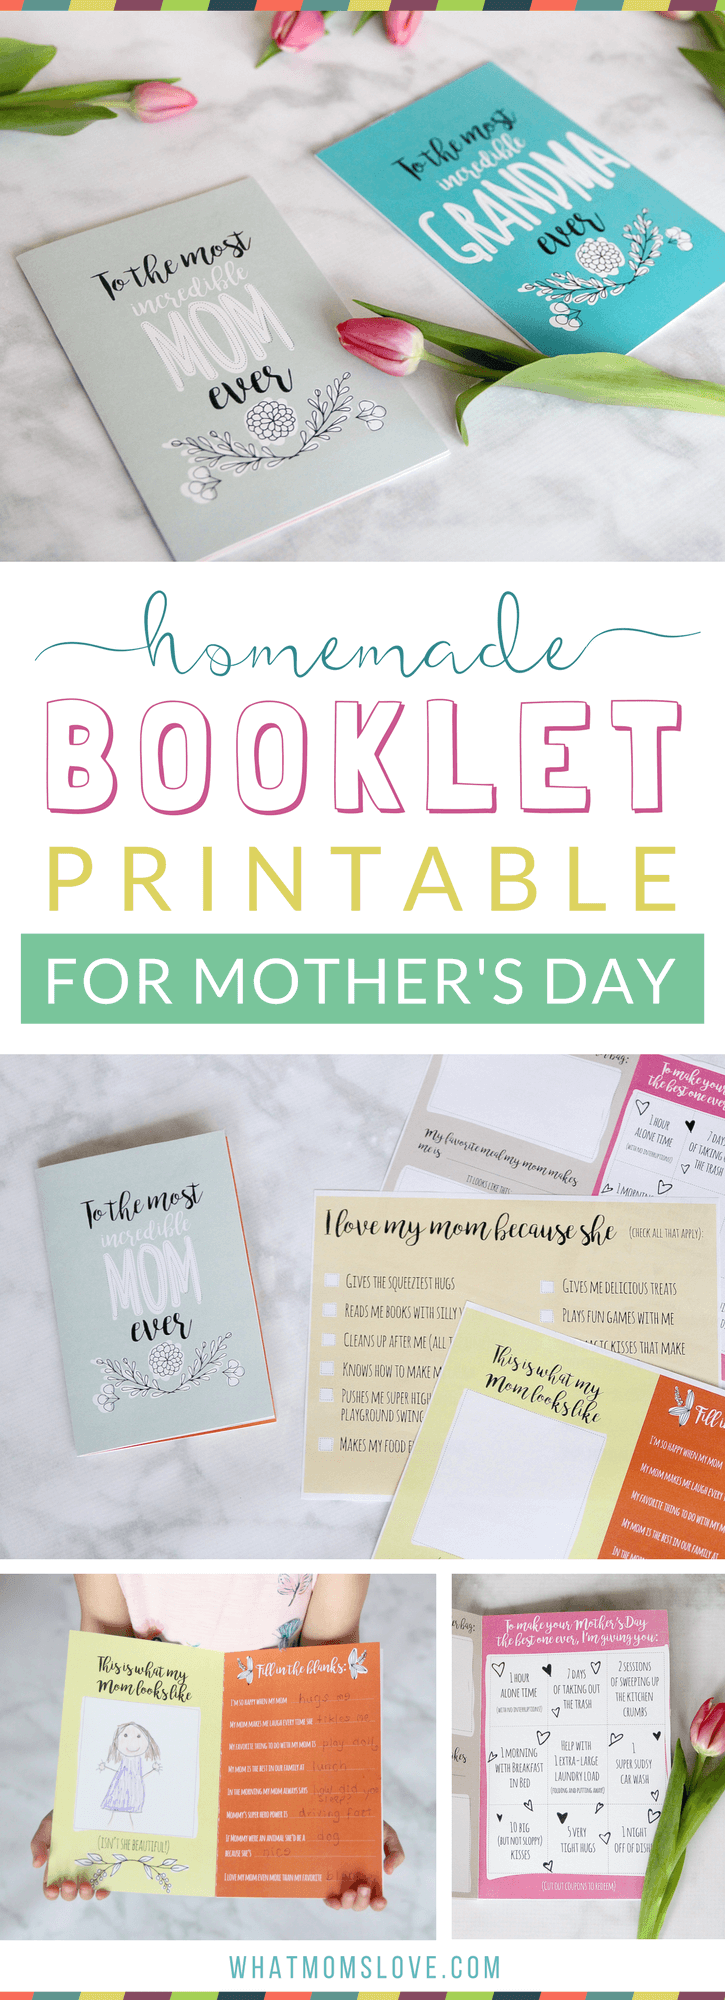 Free Printable Mothers Day Card | All About Mom or Grandma Book for kids to make - a unique personalized gift idea. Includes a fun questionnaire, coupons for mom, and space to draw and color. The perfect DIY homemade card for Mothers Day.